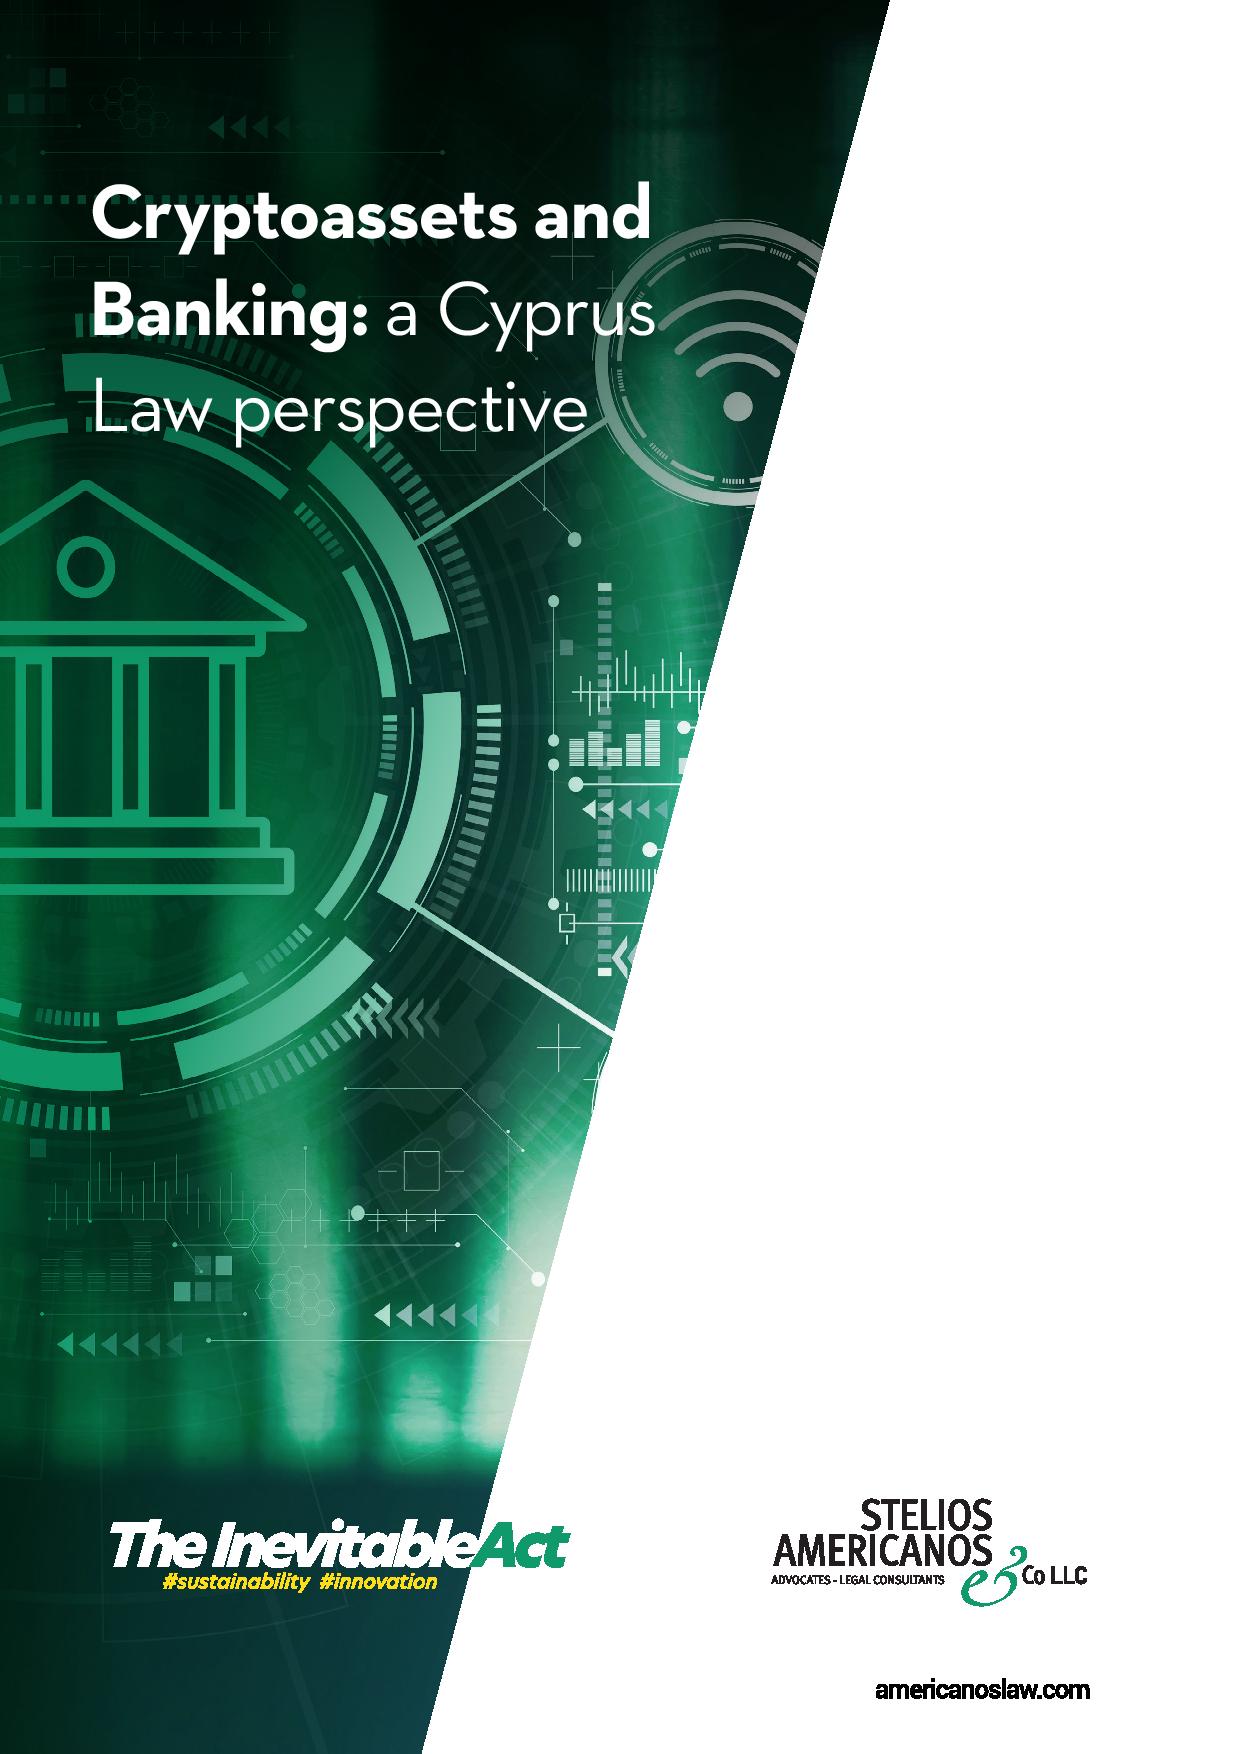 Cryptoassets and Banking: a Cyprus Law perspective